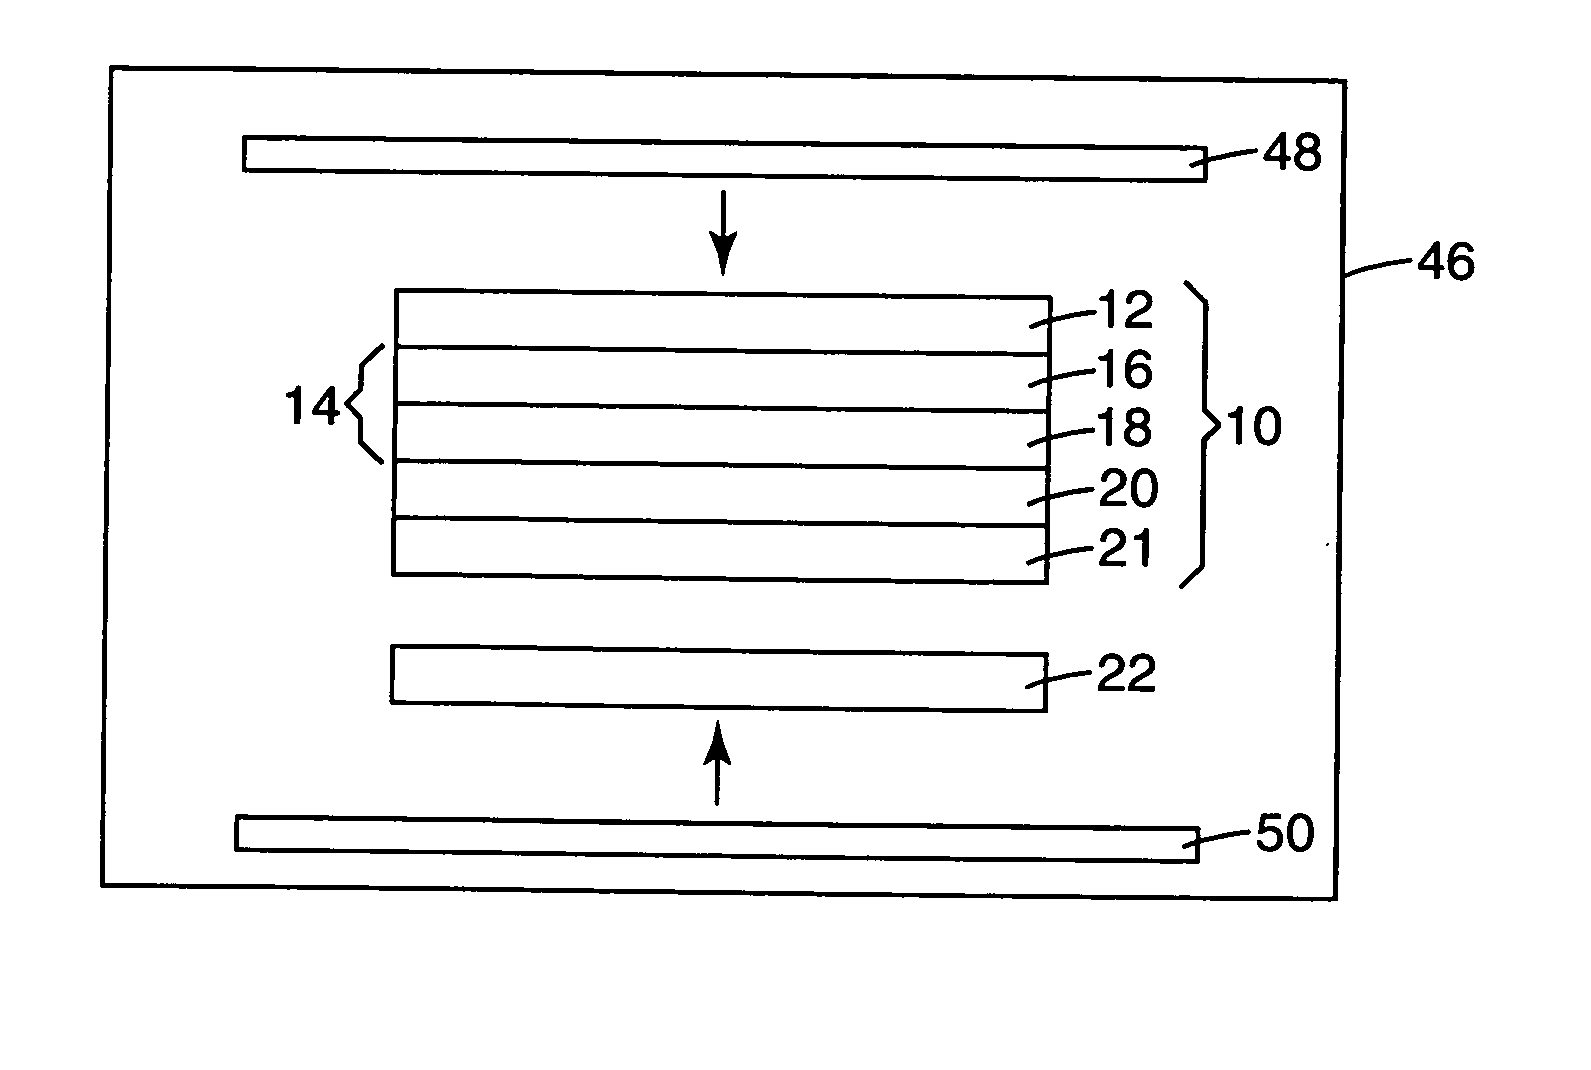 Transferable antireflection material for use on optical display